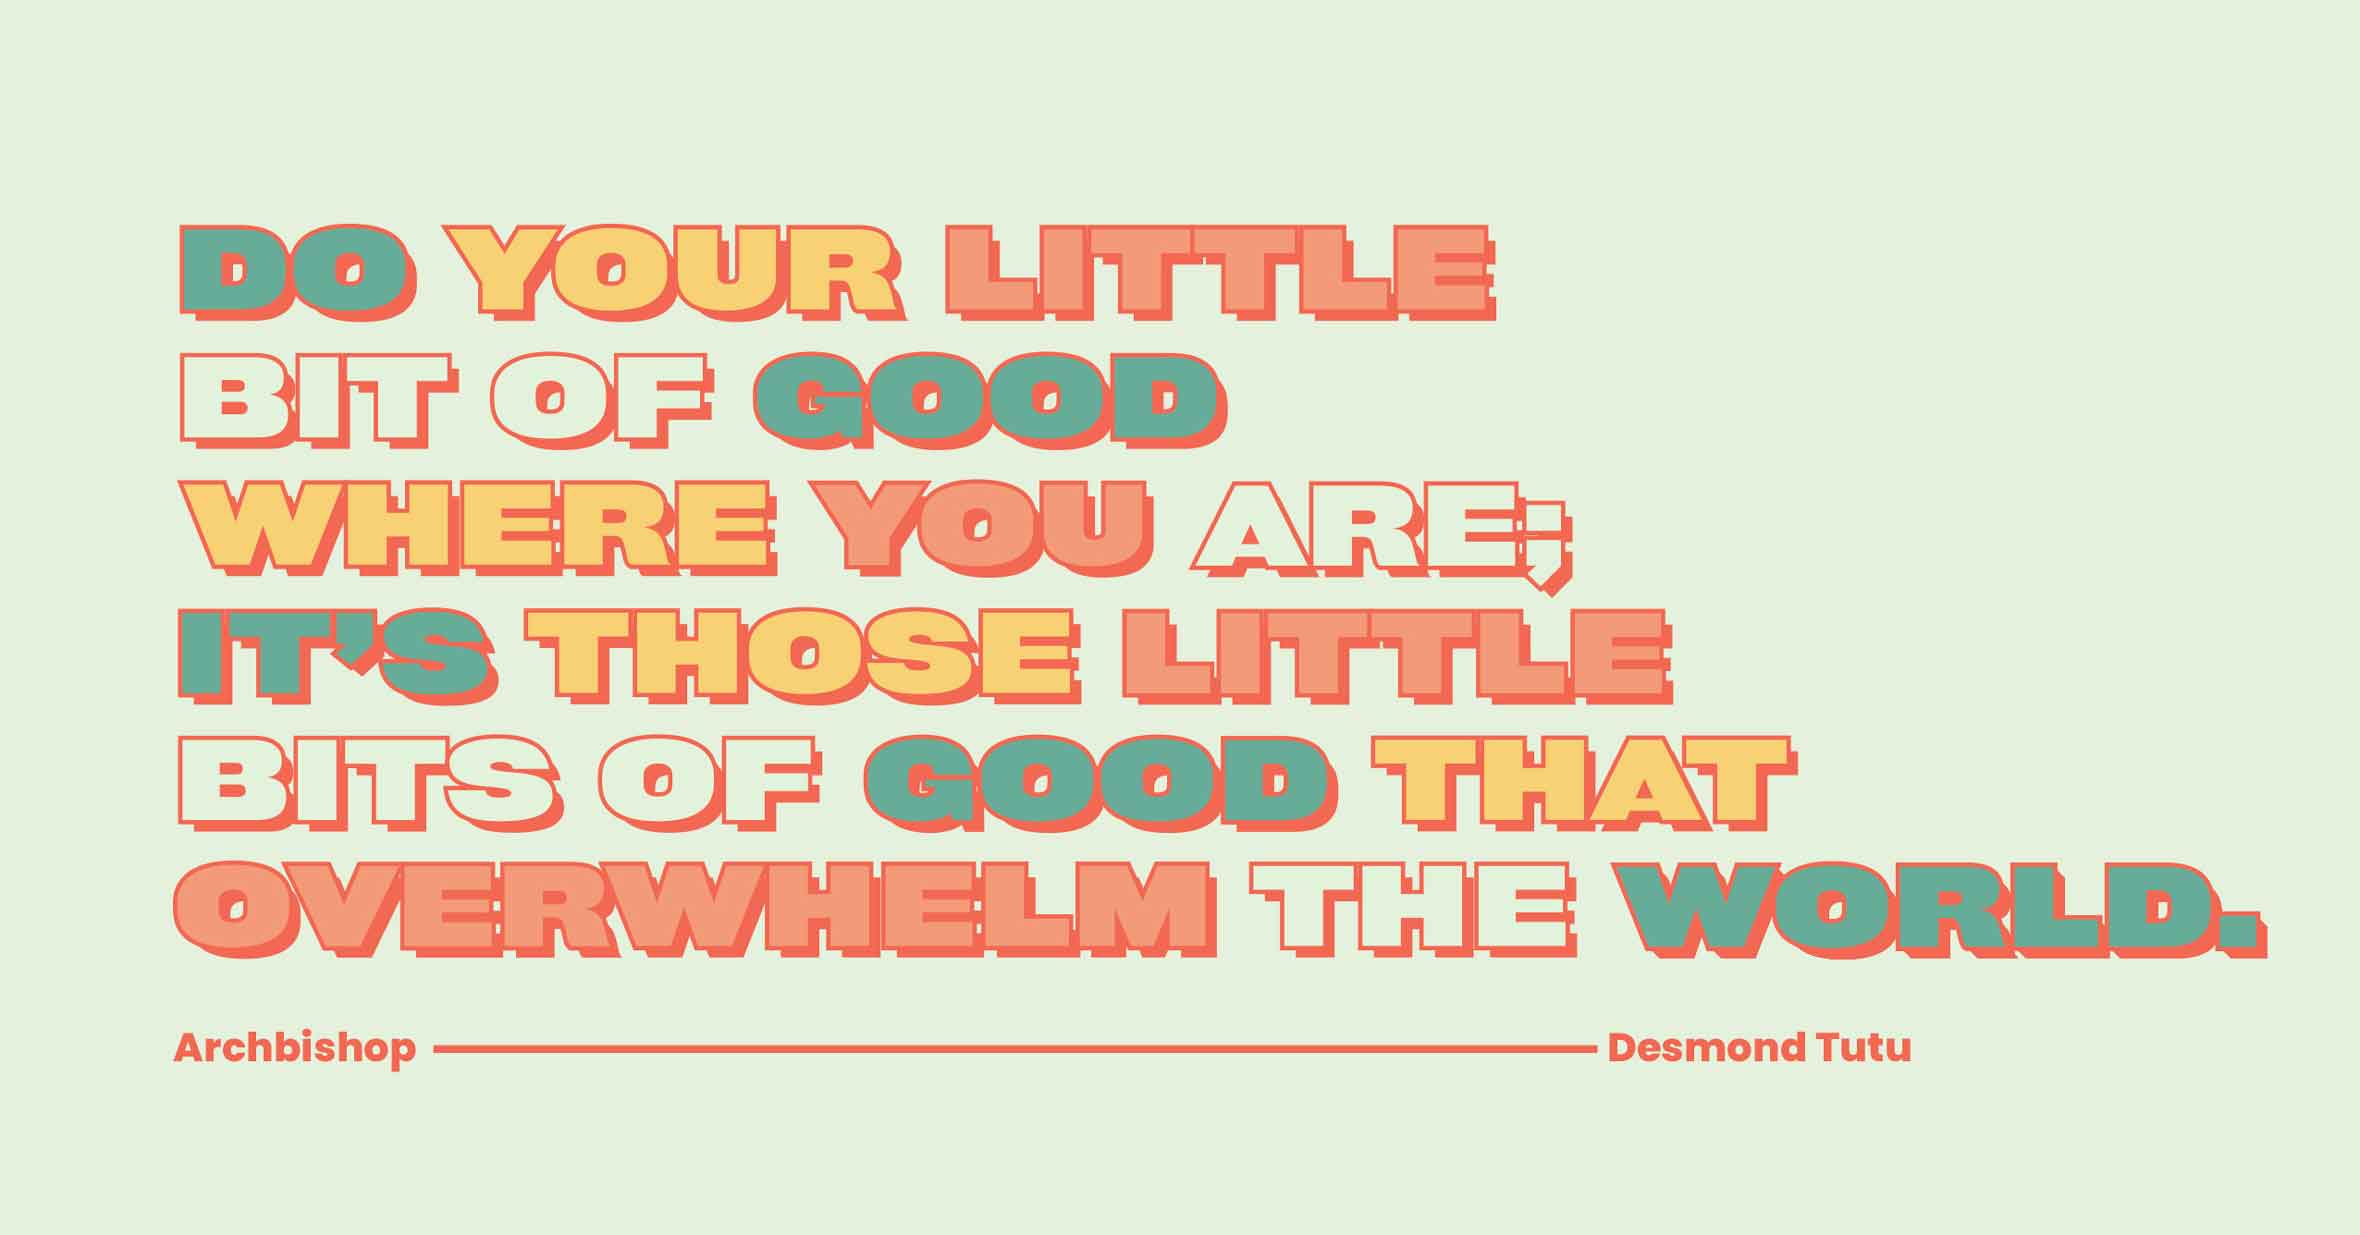 “Do your little bit of good where you are; it is those little bits of good put together that overwhelm the world.” — Archbishop Desmond Tutu